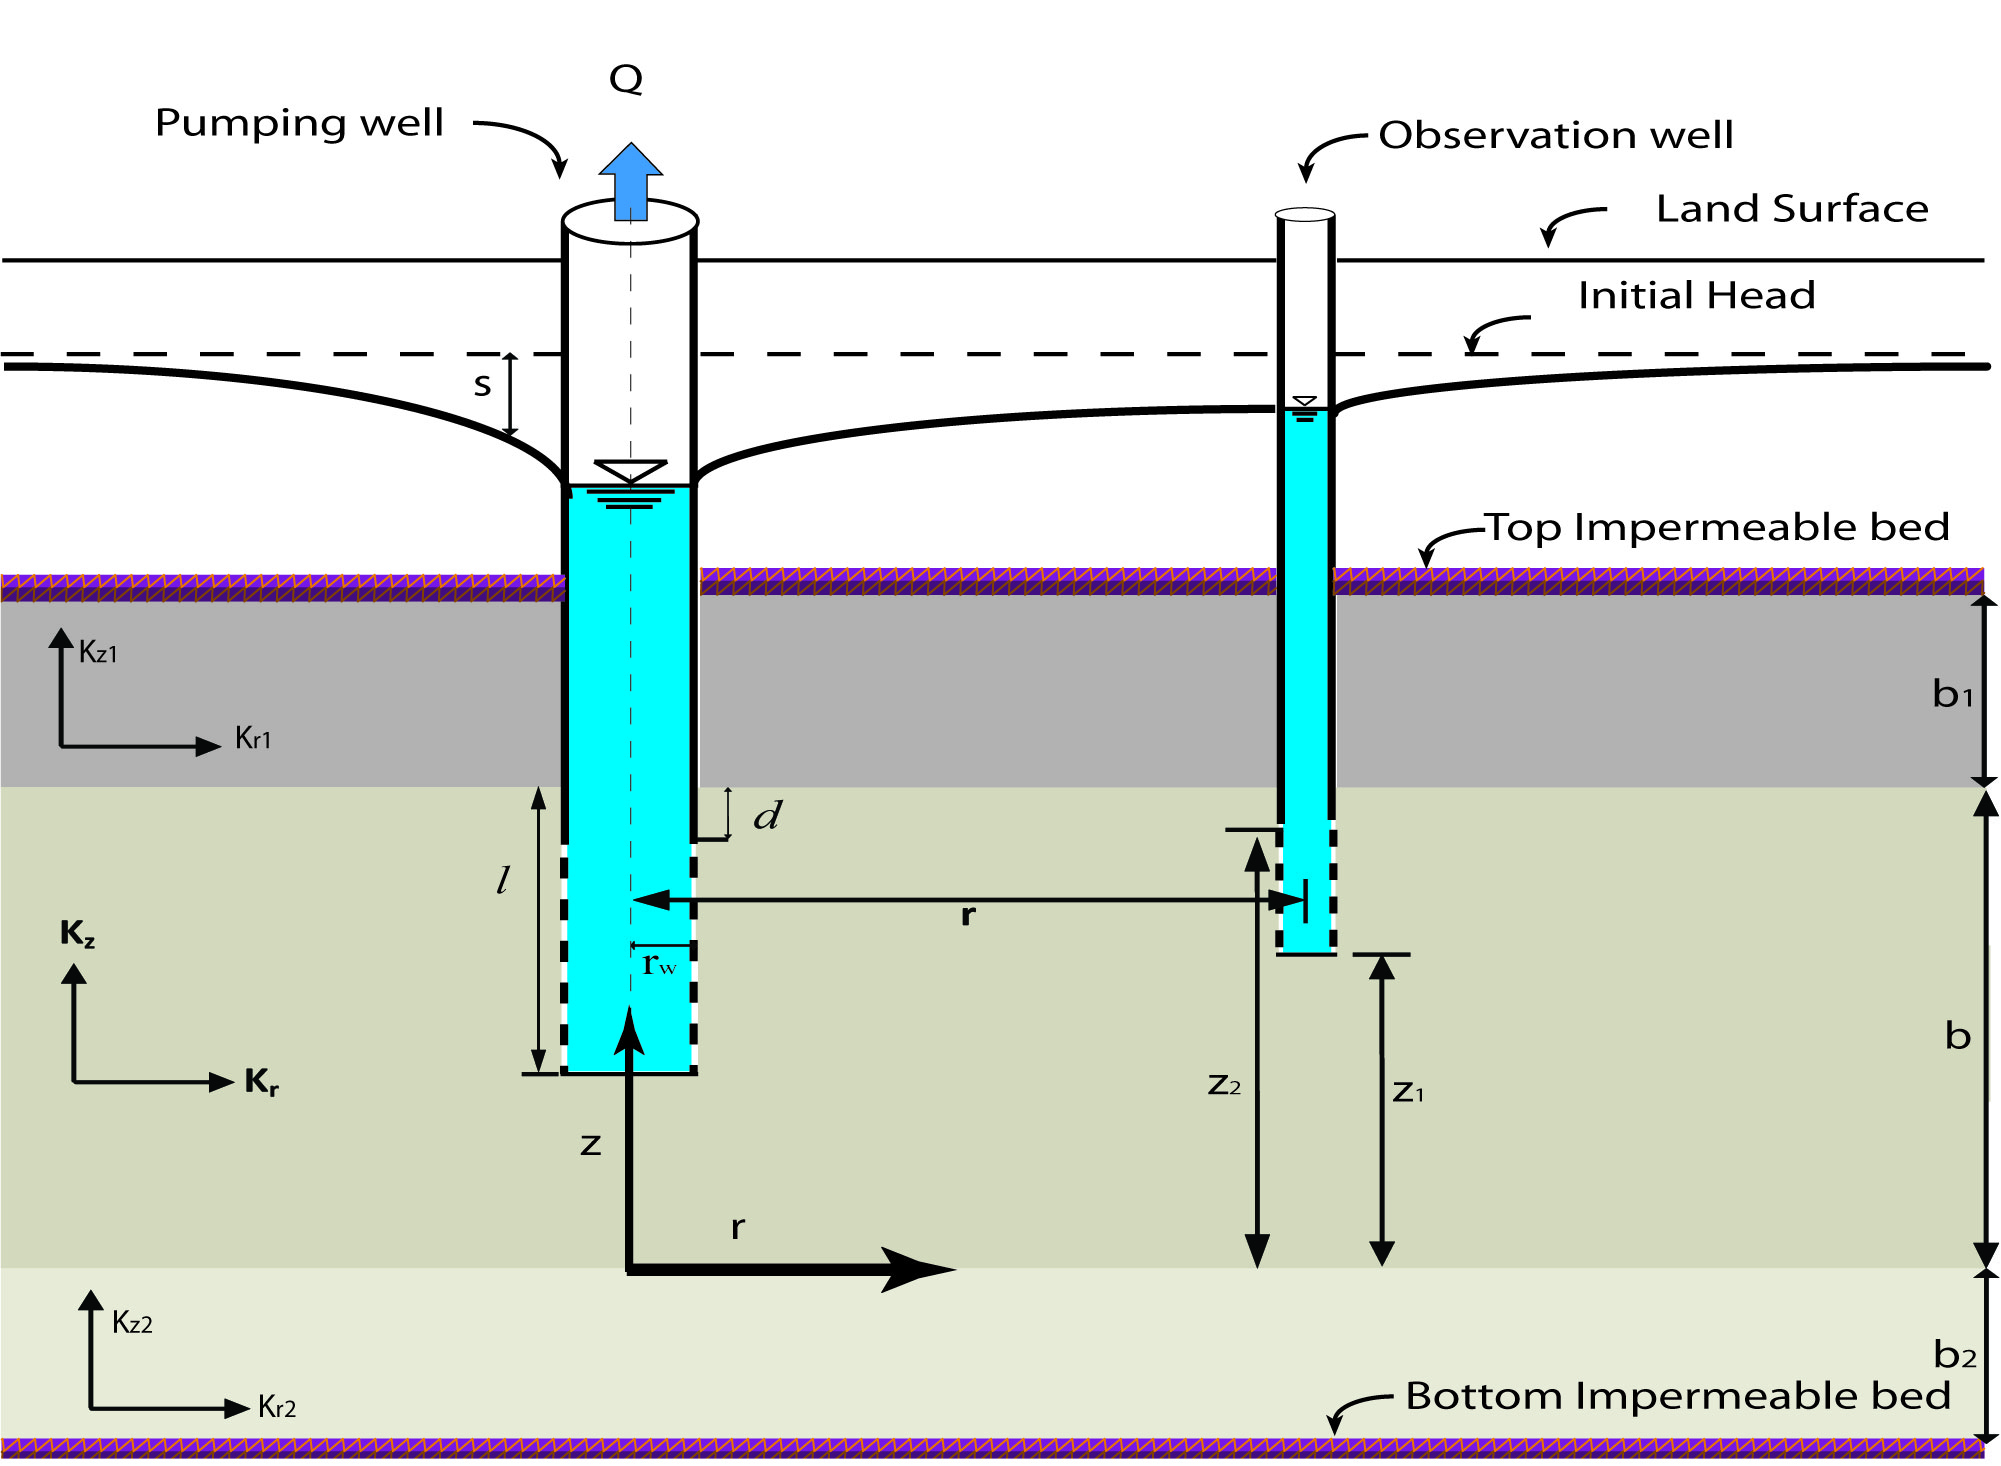 Schematic of leaky confined Aquifer